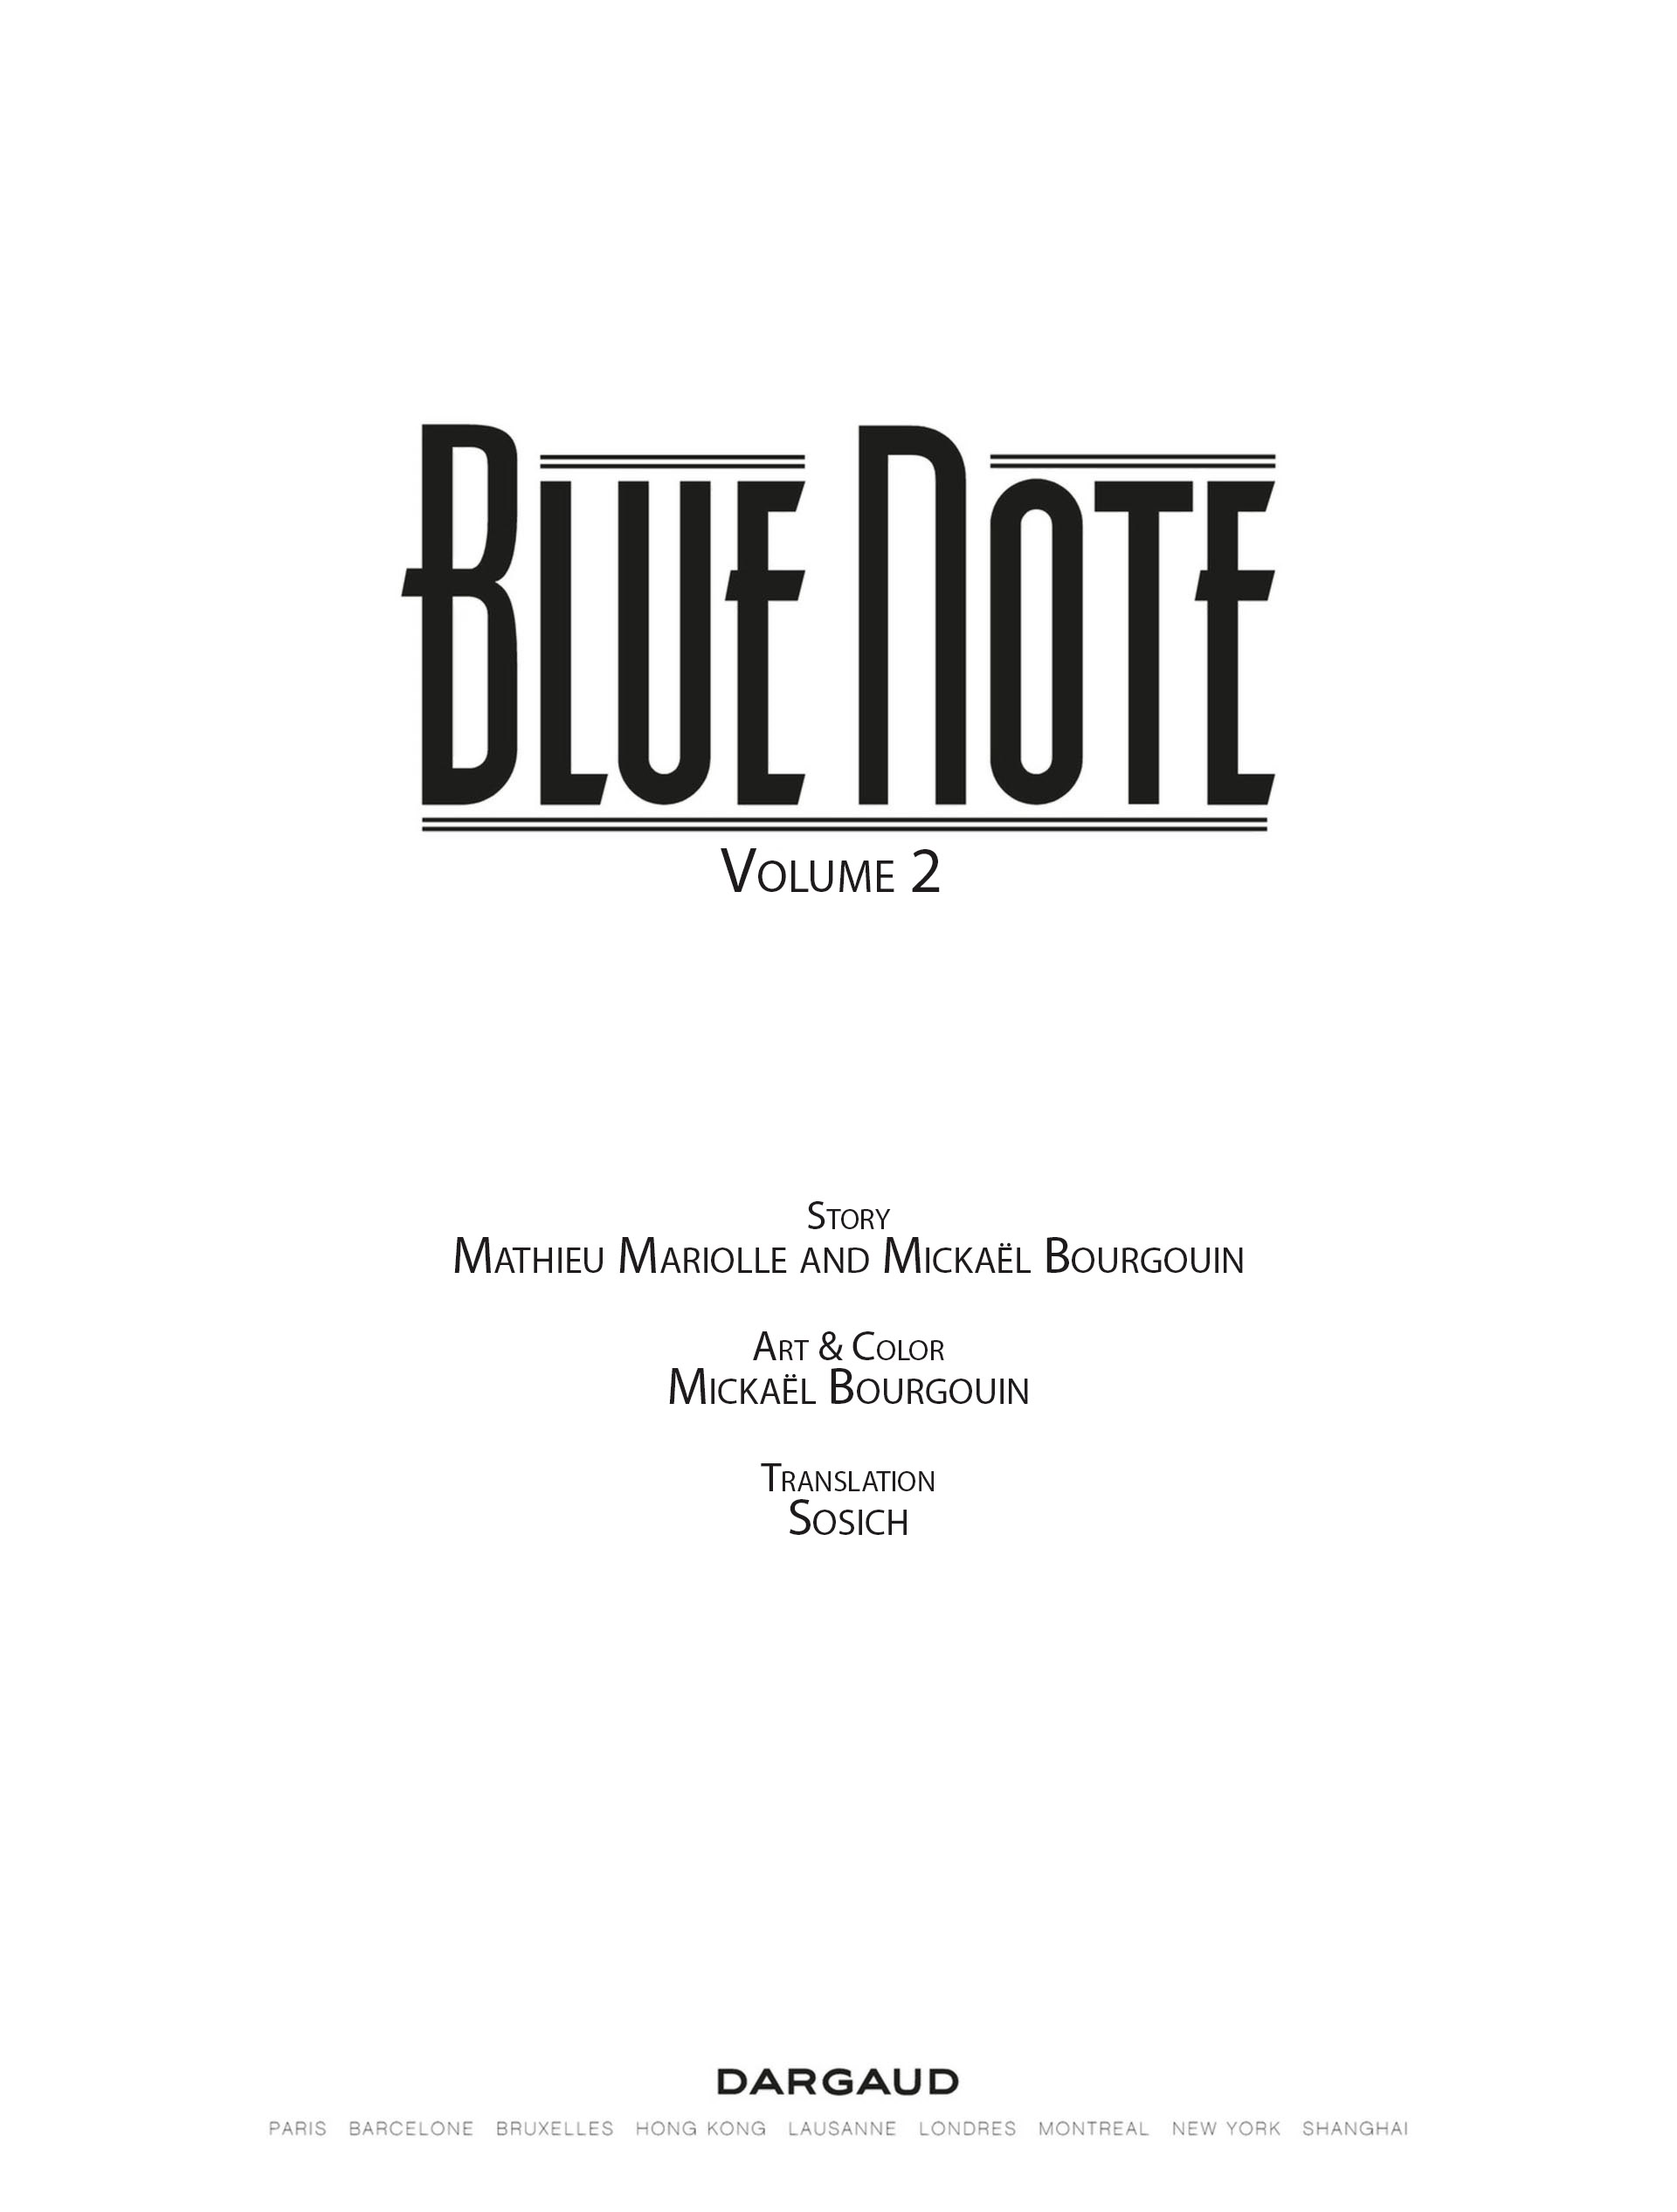 Read online Blue Note comic -  Issue #2 - 2